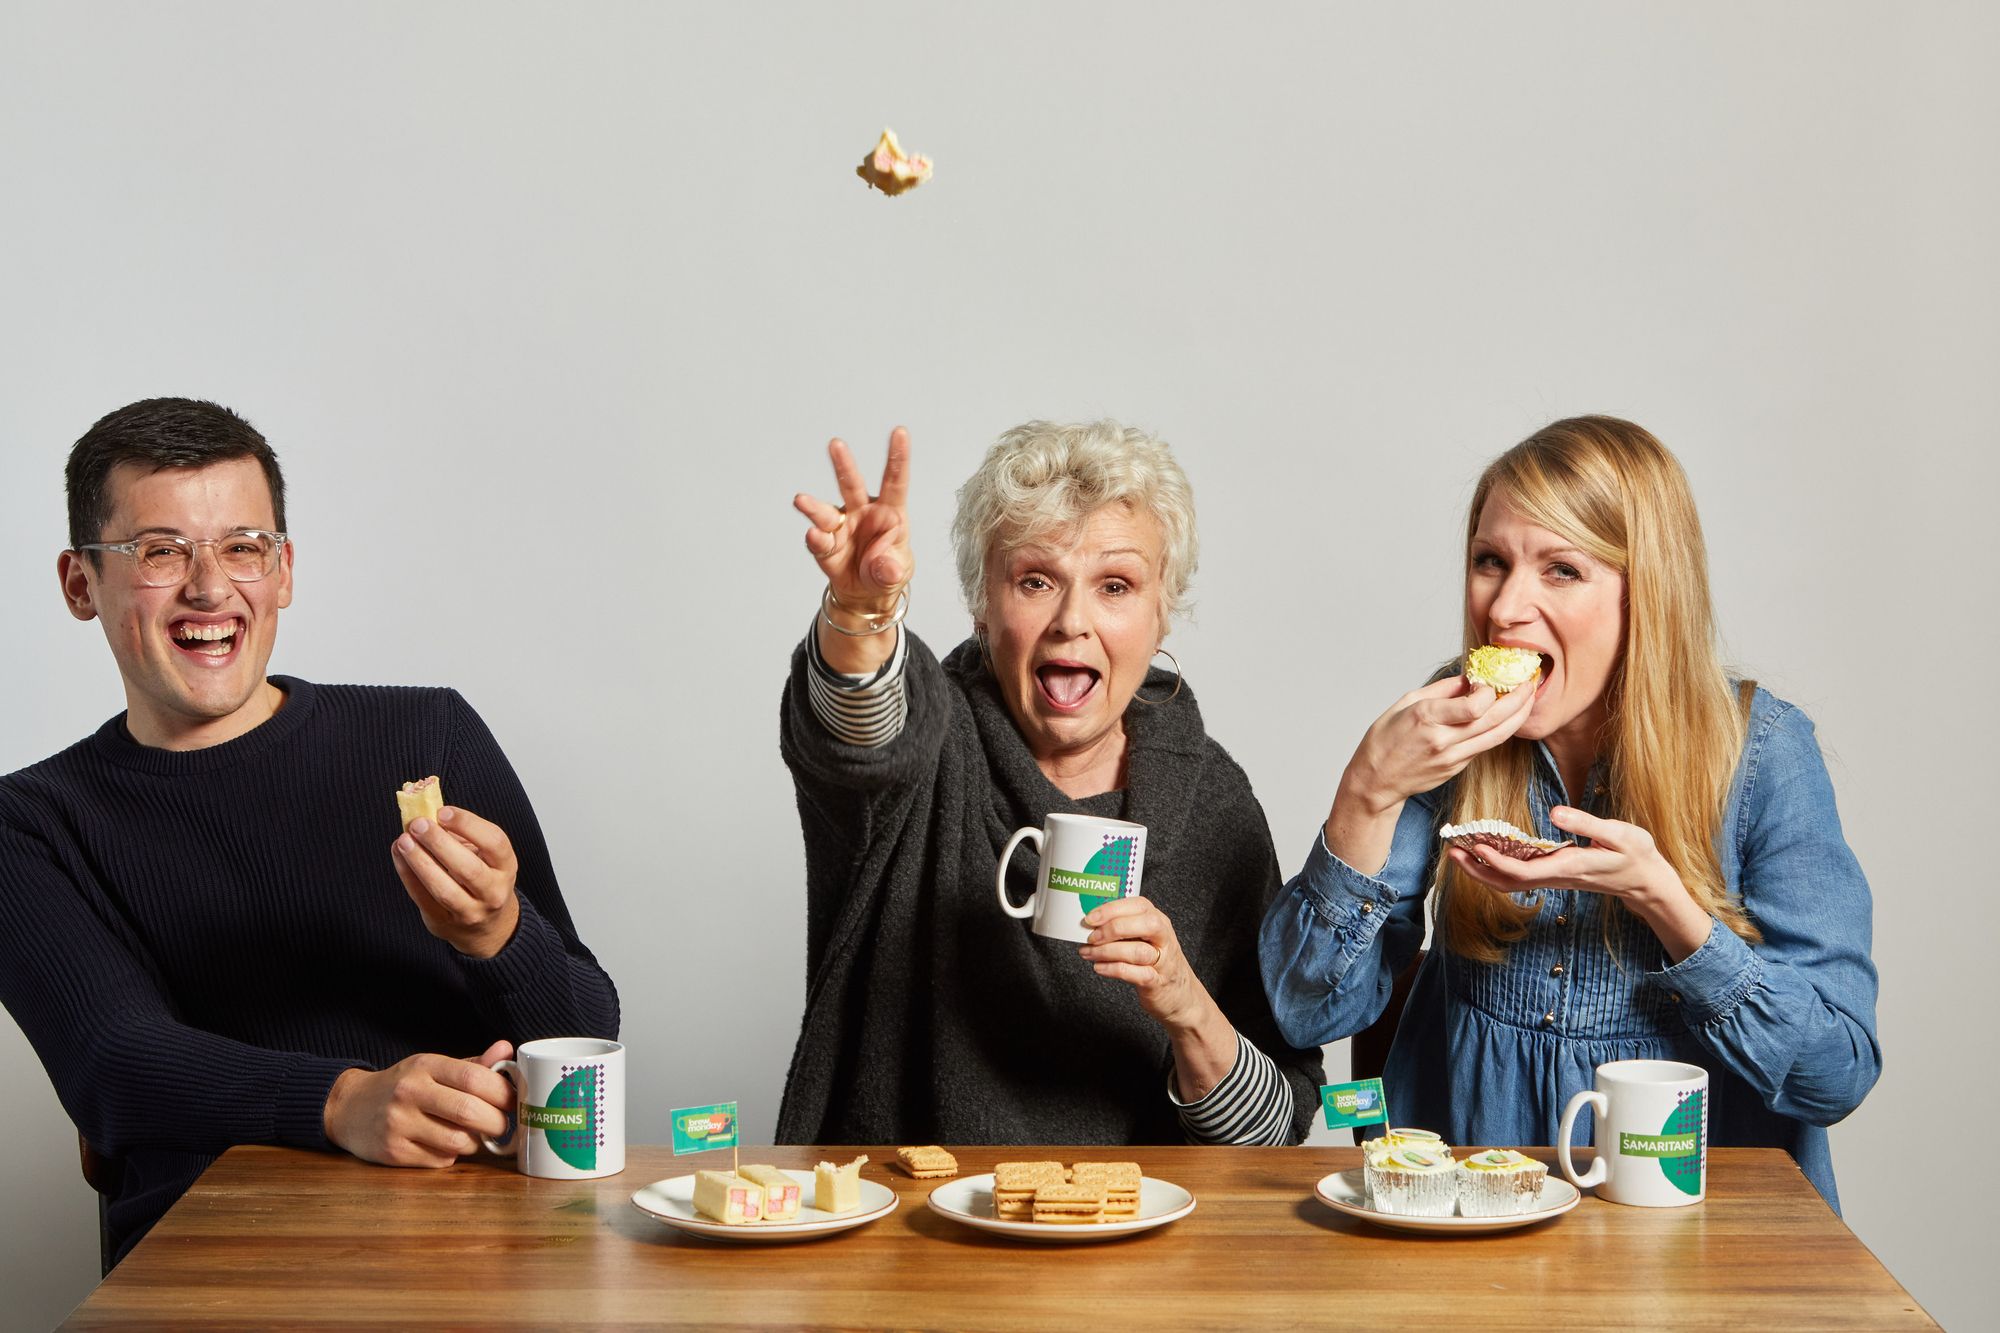 Michael Chakraverty, Dame Julie Walters and Rachel Parris share a cup of tea and cake together in support of Brew Monday